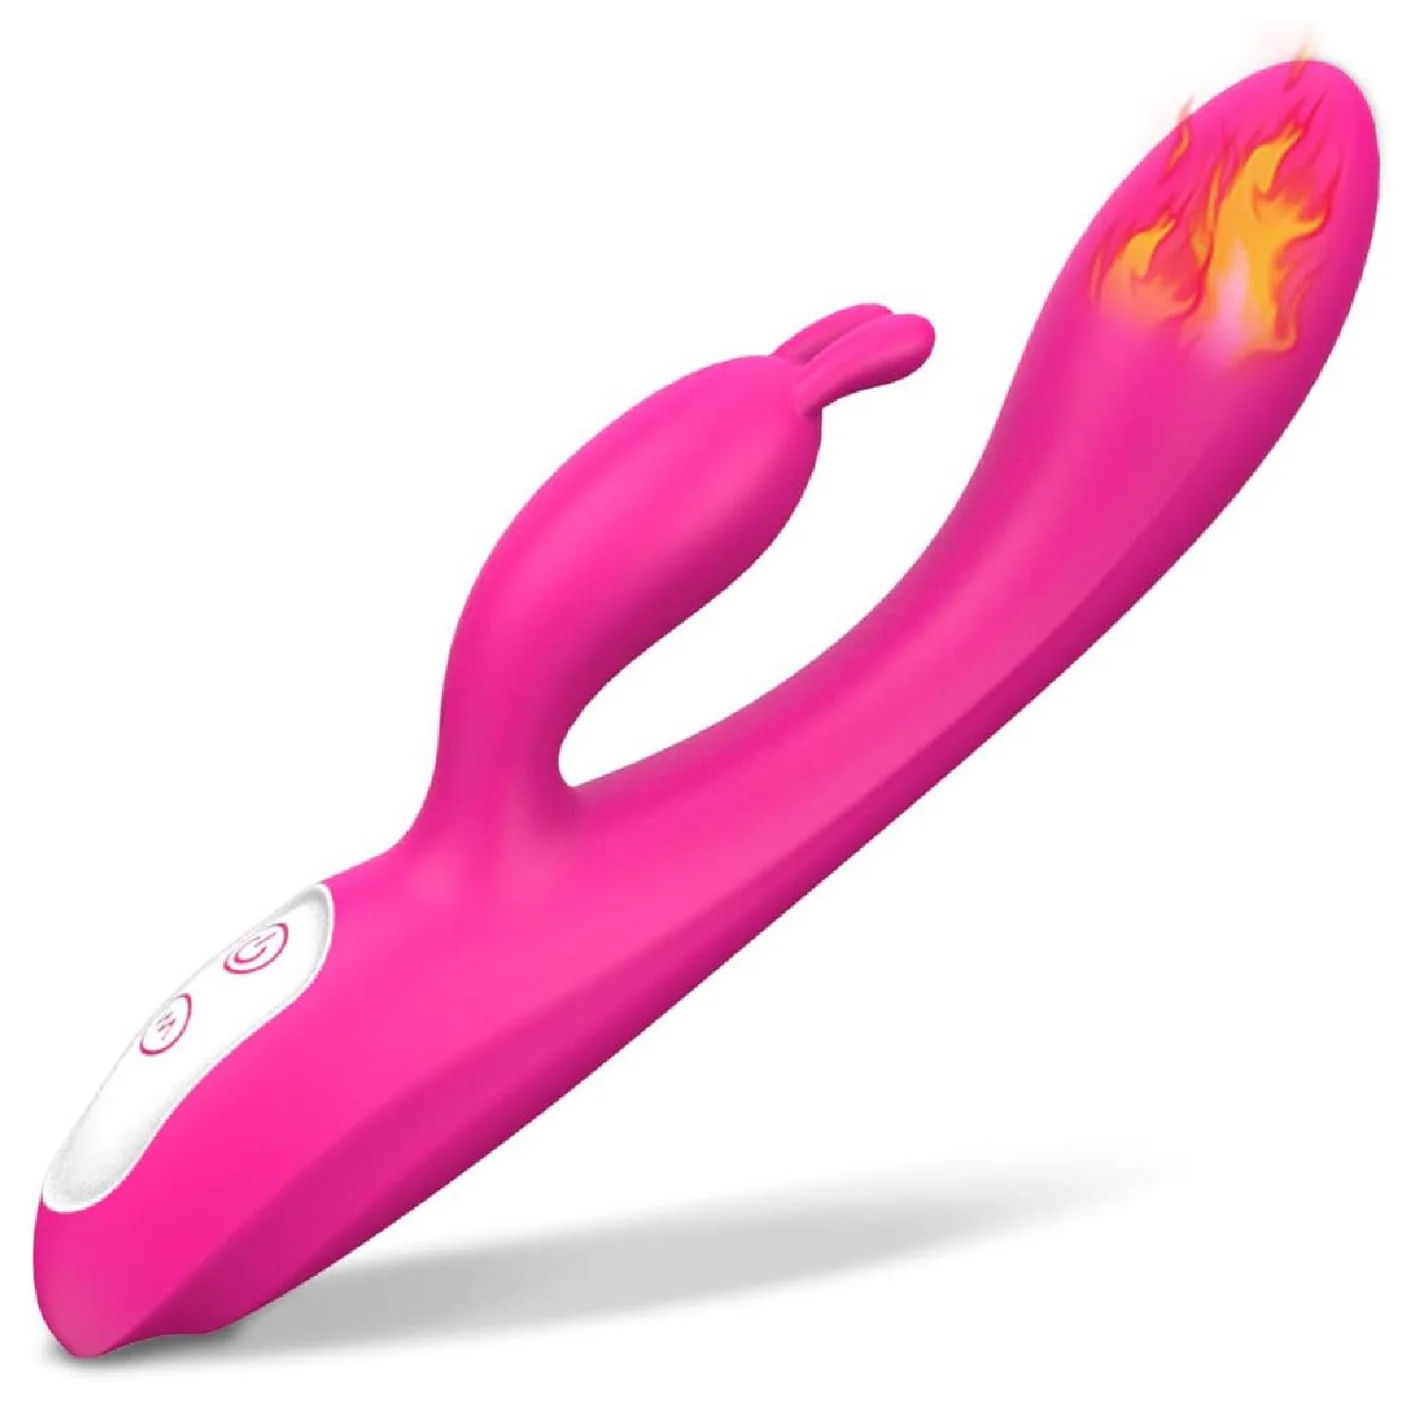 G Spot Rabbit Vibrator with Heating Function and Bunny Ears for Clitoris G-spot Stimulation,Waterproof Dildo 9 Powerful Vibrations Dual Motor Stimulator Women or Couple Fun(Red)